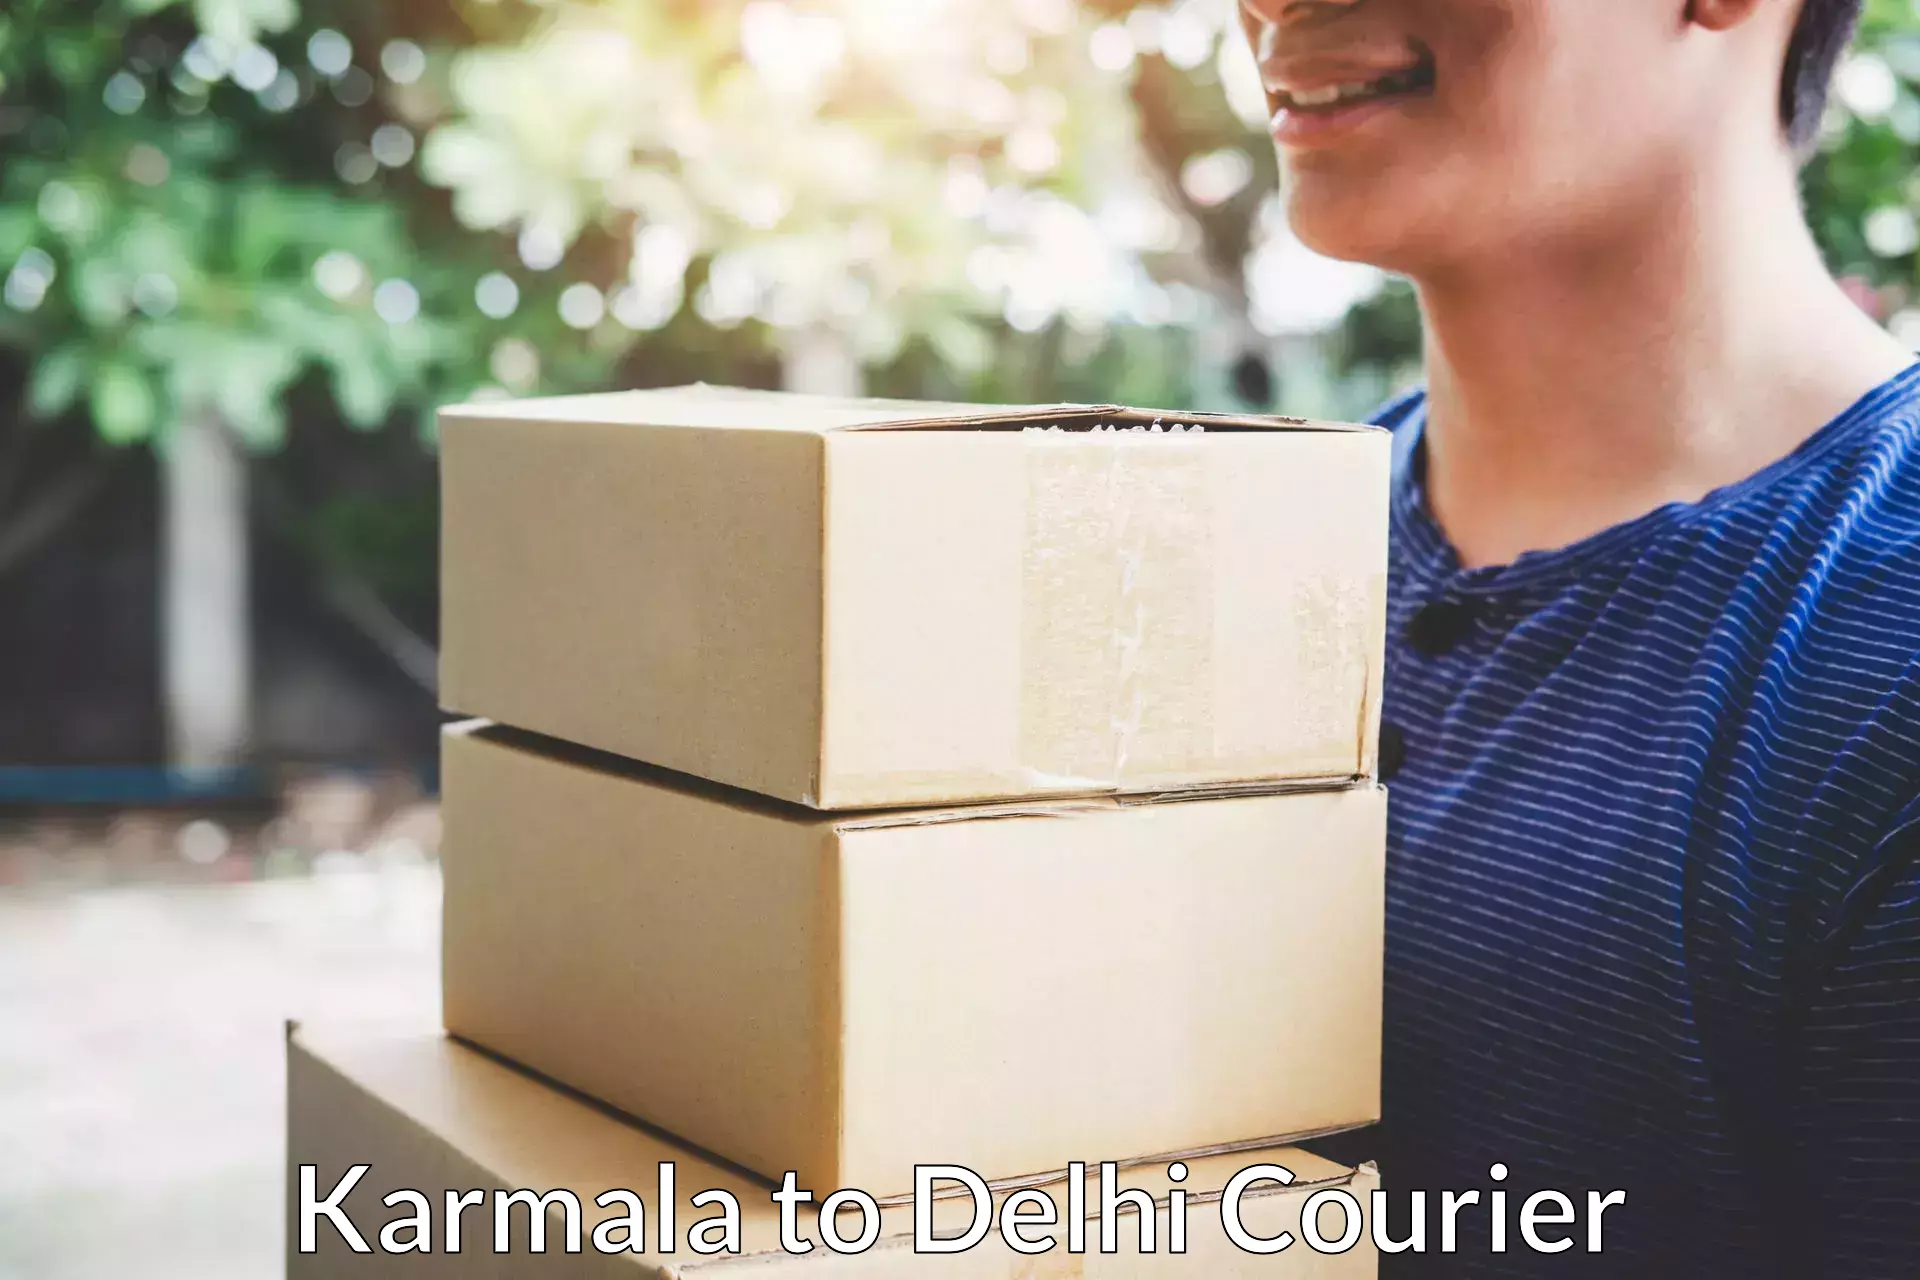 Professional movers and packers Karmala to Delhi